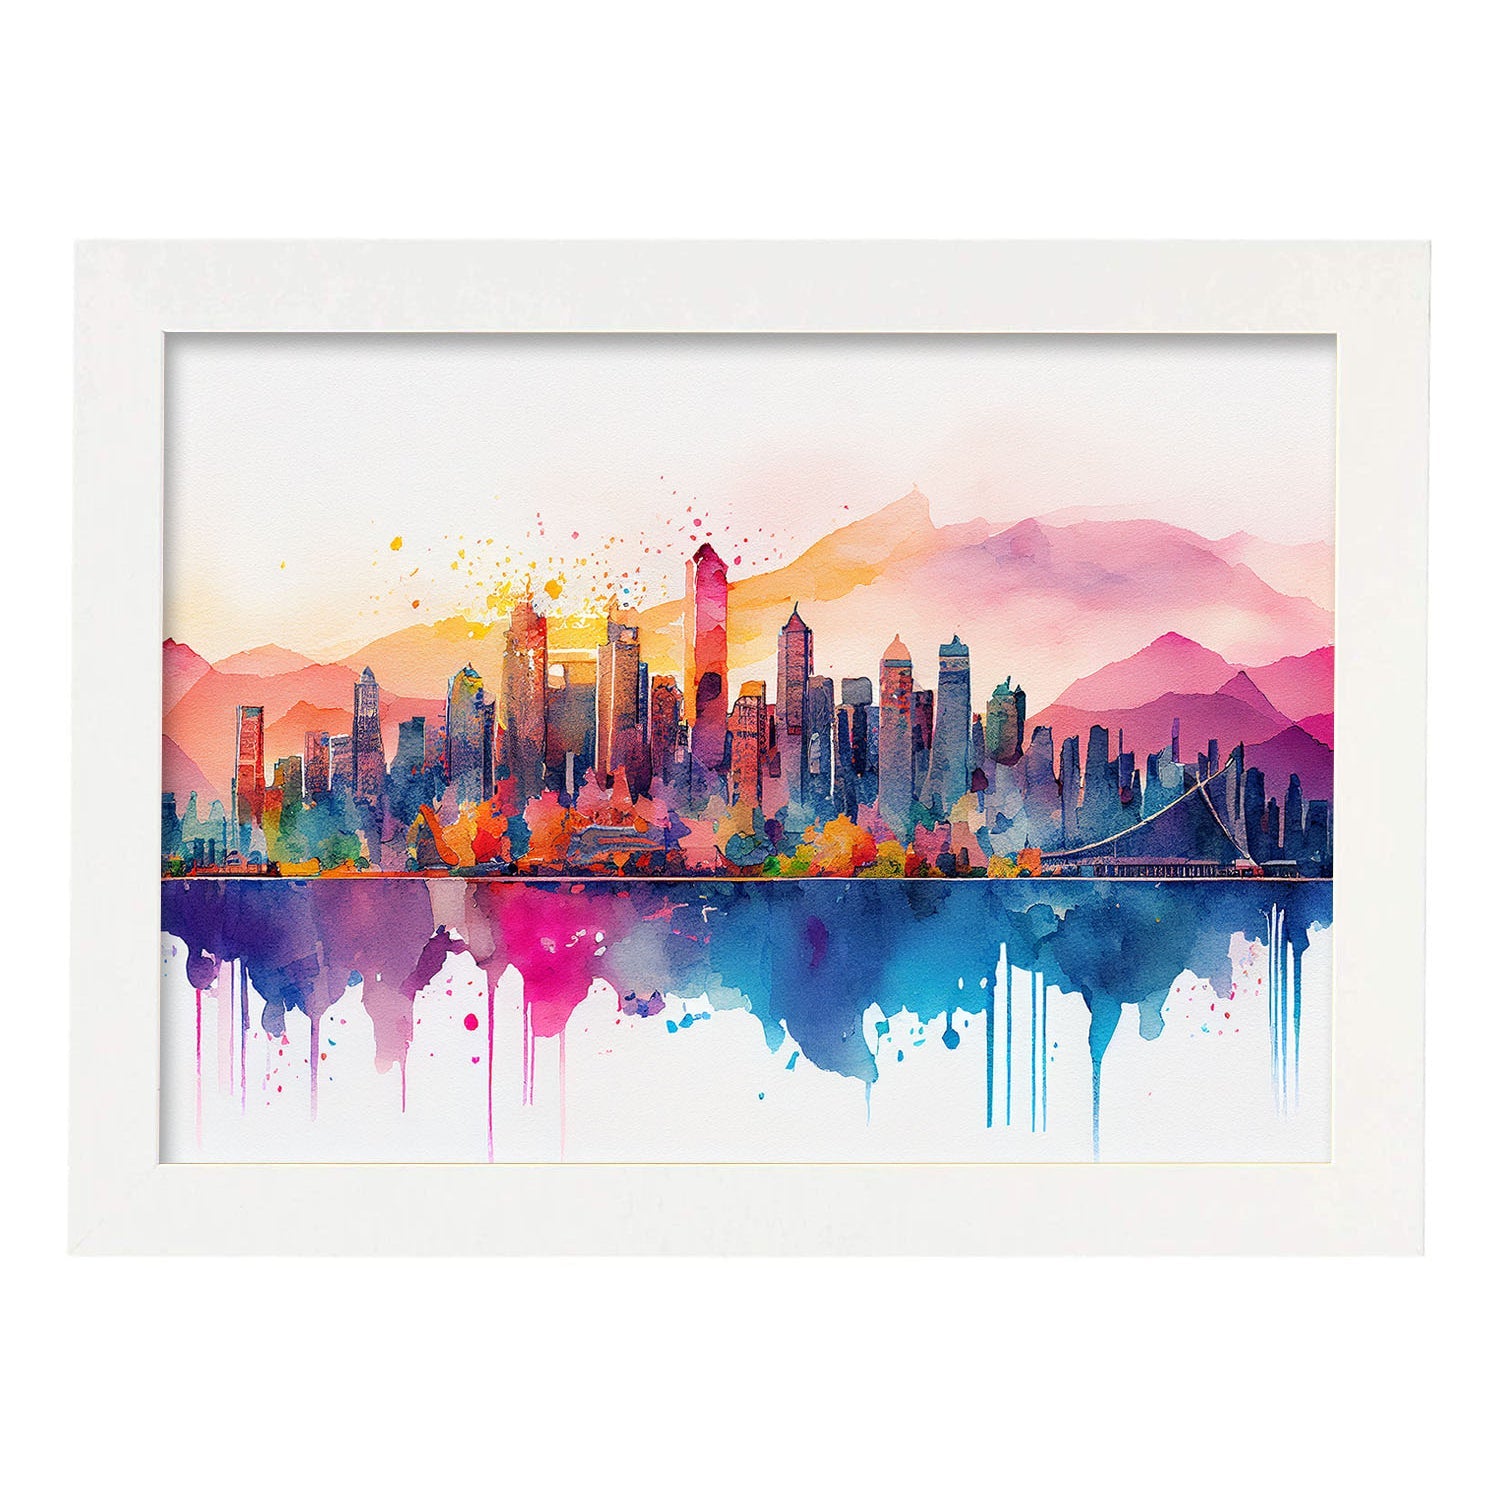 Nacnic watercolor of a skyline of the city of Vancouver. Aesthetic Wall Art Prints for Bedroom or Living Room Design.-Artwork-Nacnic-A4-Marco Blanco-Nacnic Estudio SL